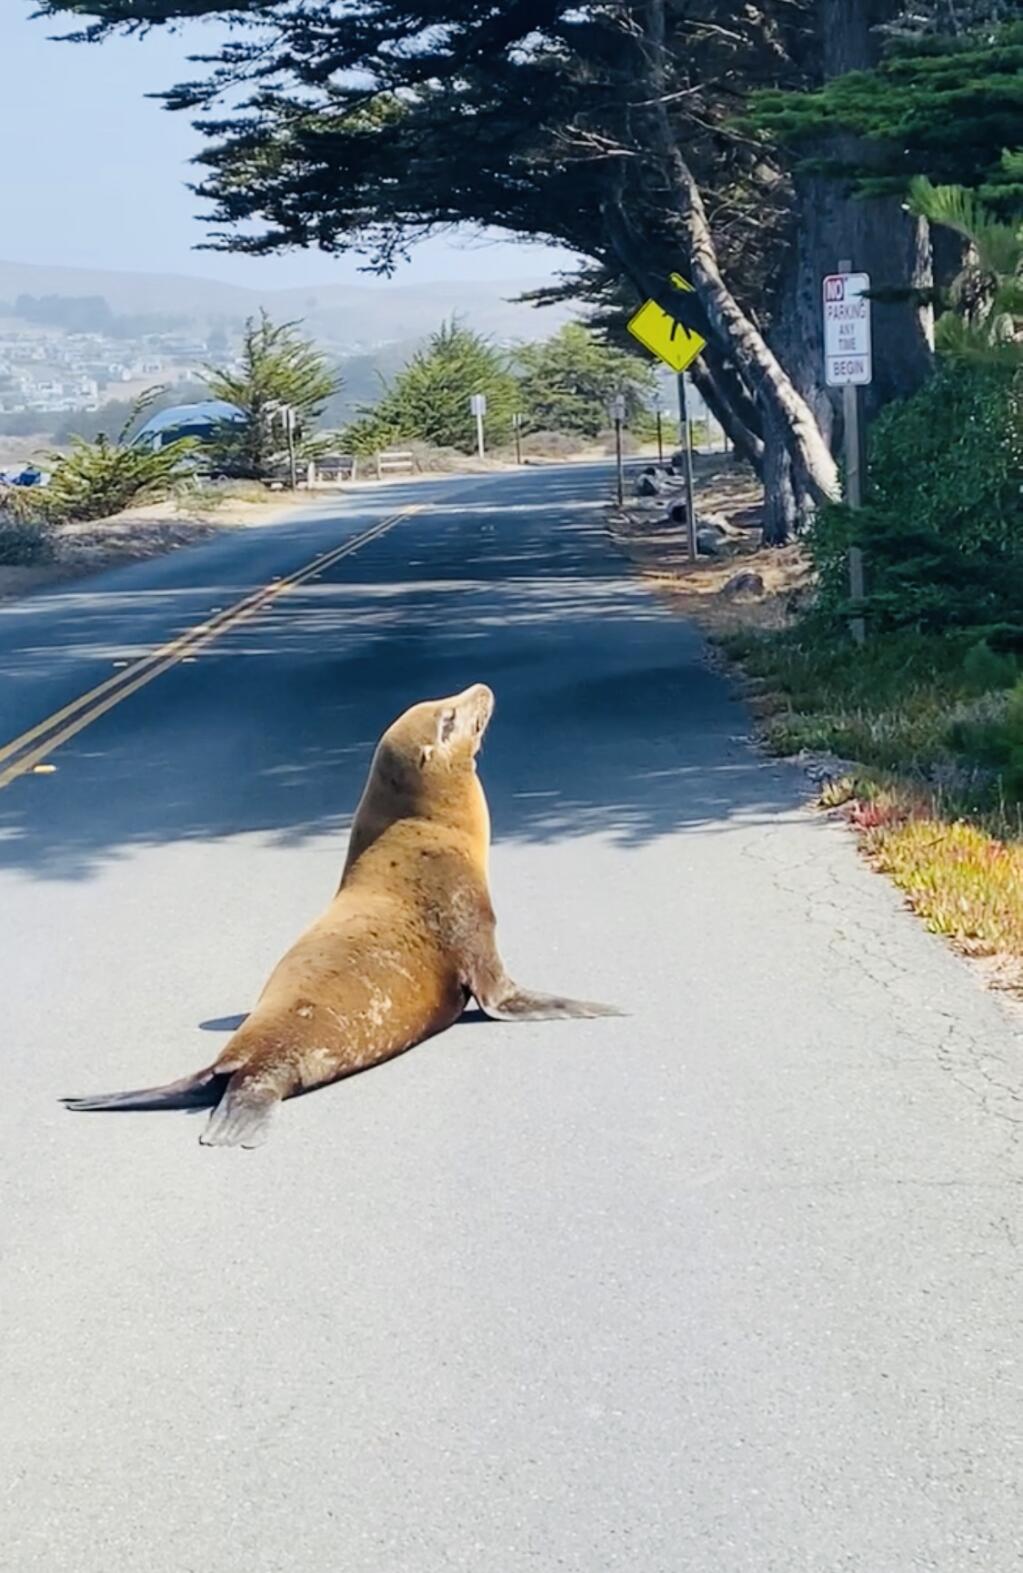 A seal pup beached-up on Doran Beach Road near Cypress day use area in Doran Regional park. Ranger James Gergus helped load the crated animal onto a Marine Mammal Center rescue truck. (Photo by Ranger James Gergus)